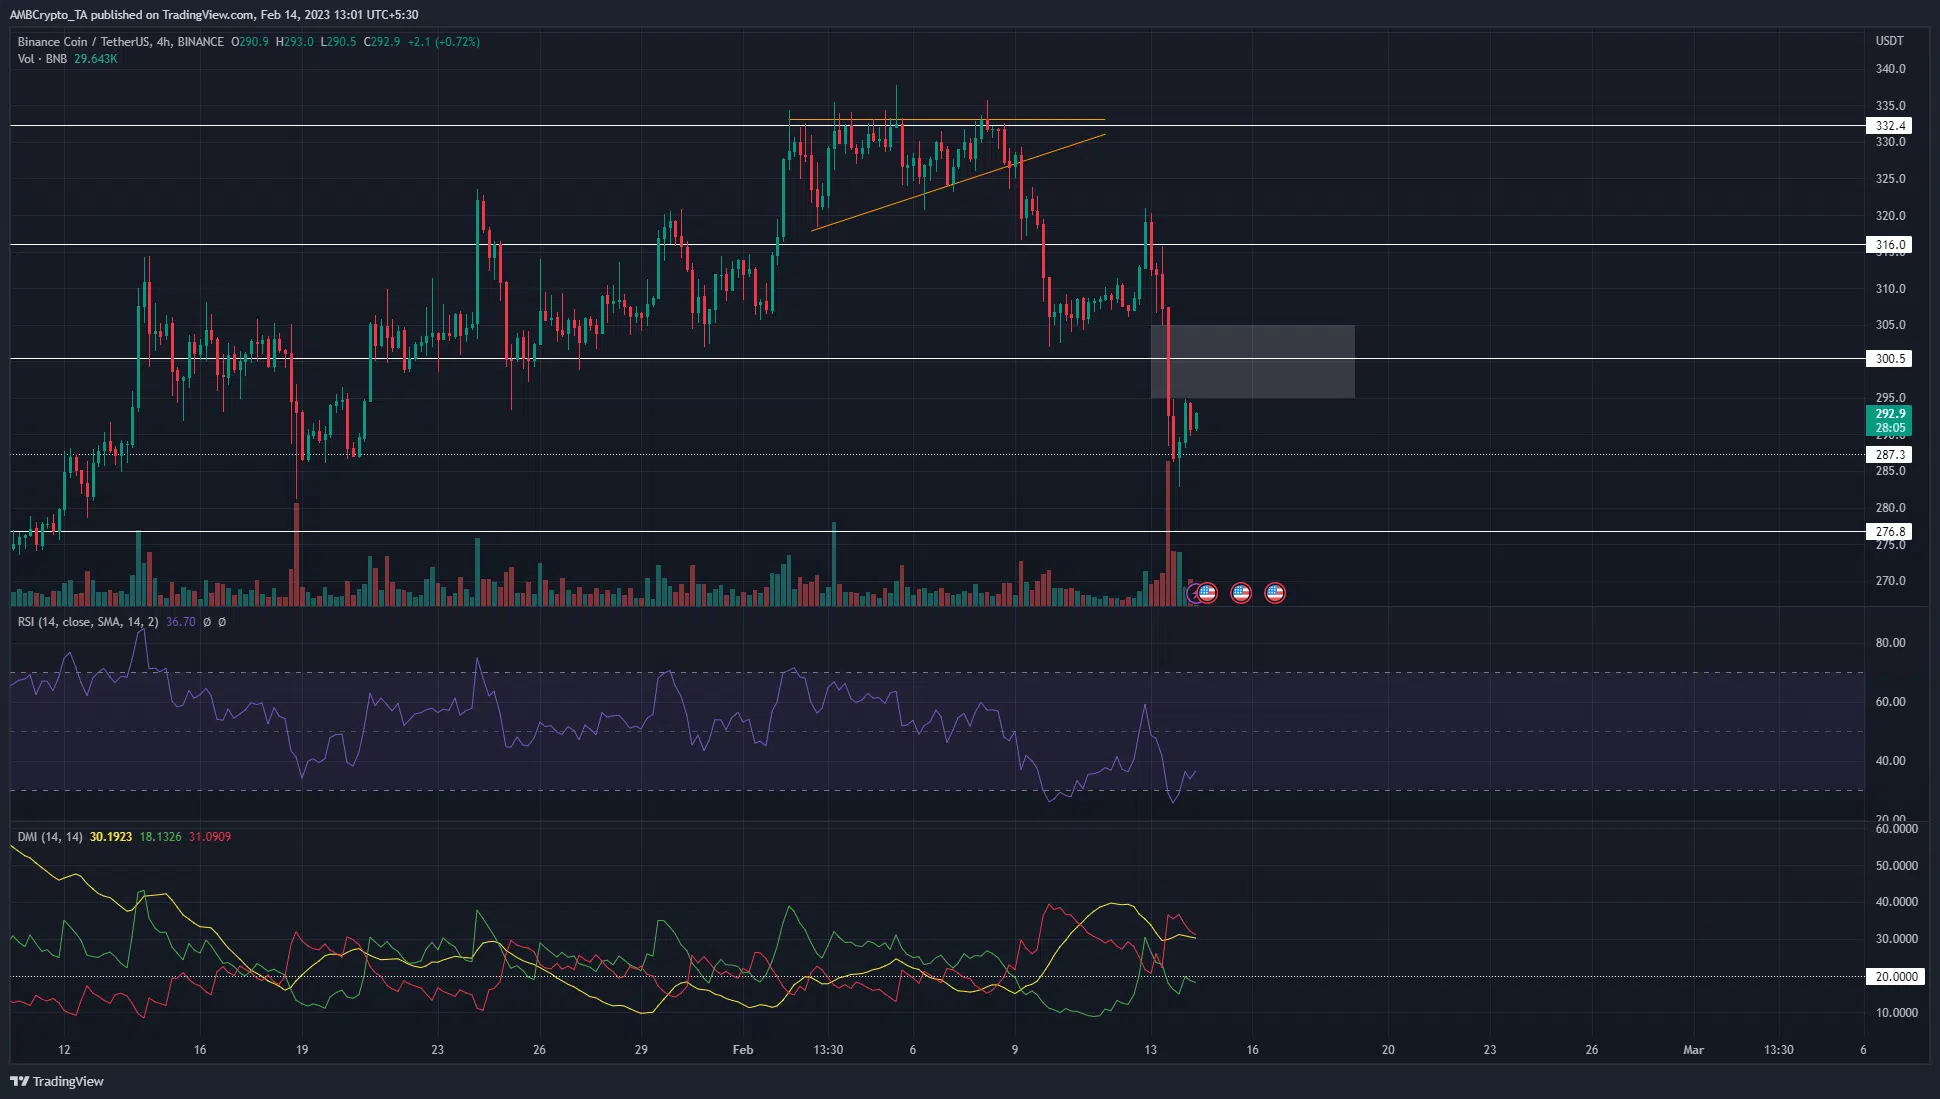 Binance Coin saw a bullish pattern fail, traders can look to enter short positions soon